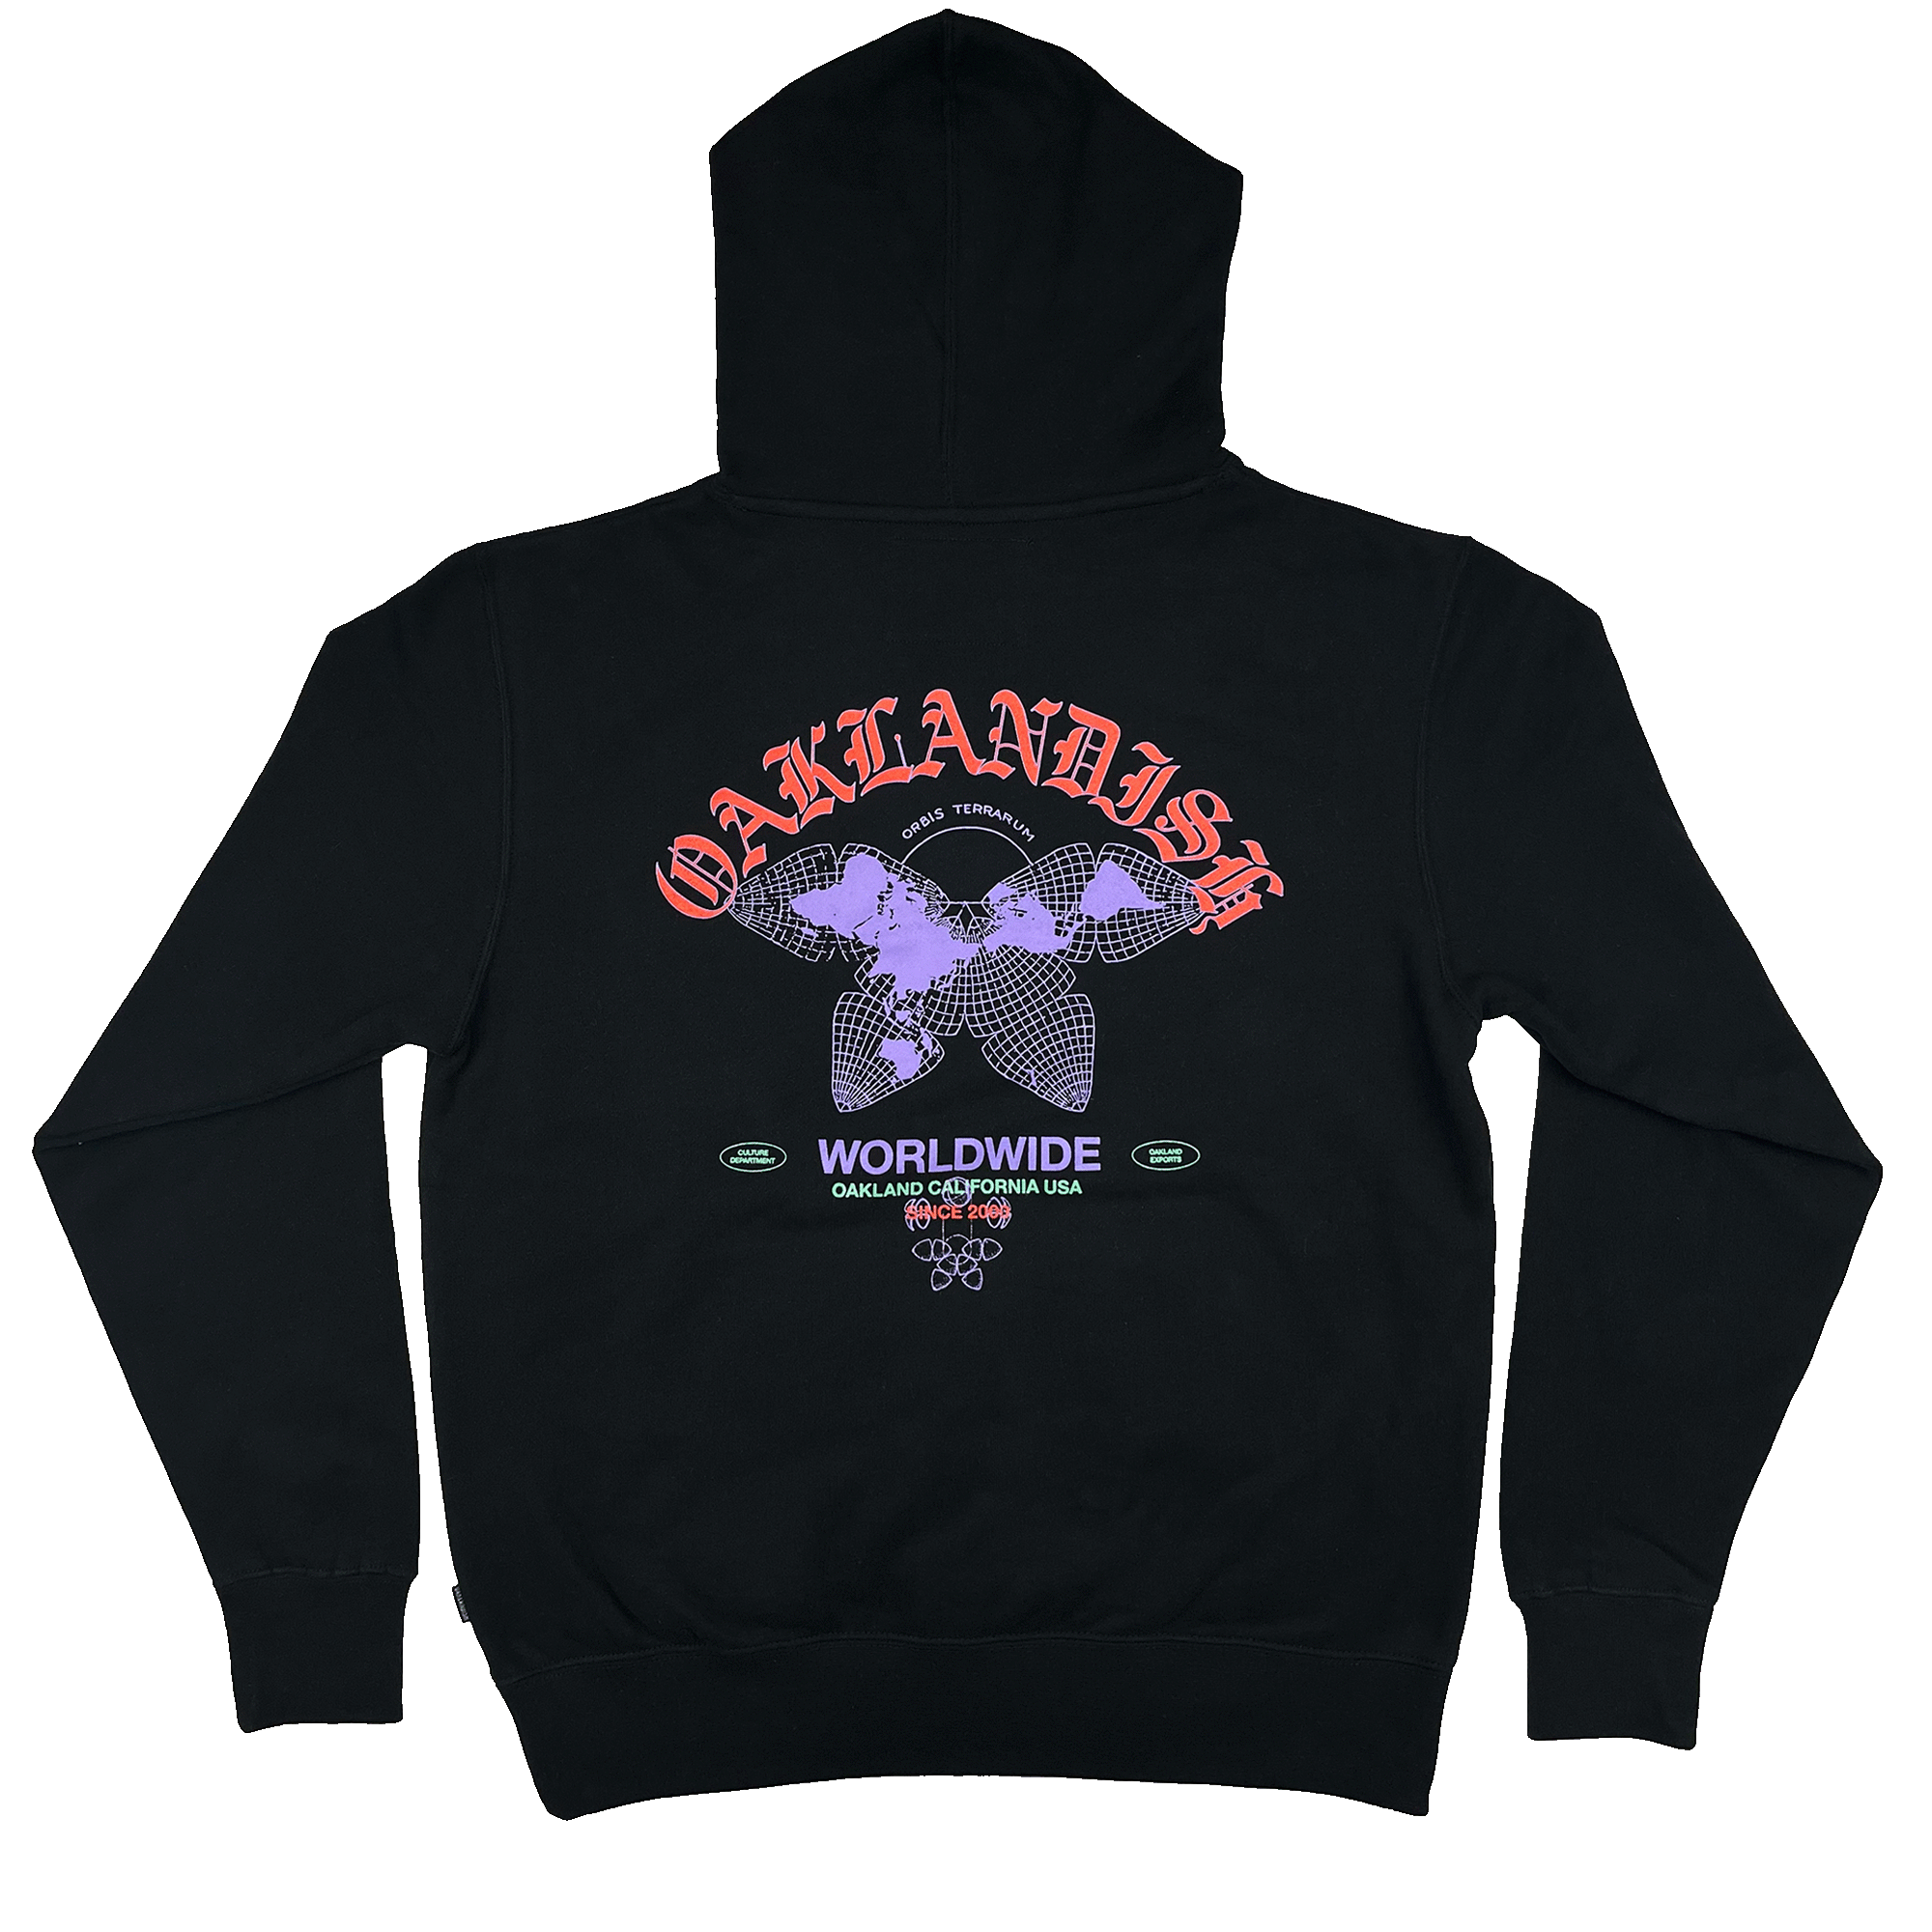 Black hoodie with red, purple, and green Oaklandish worldwide graphic on the back.